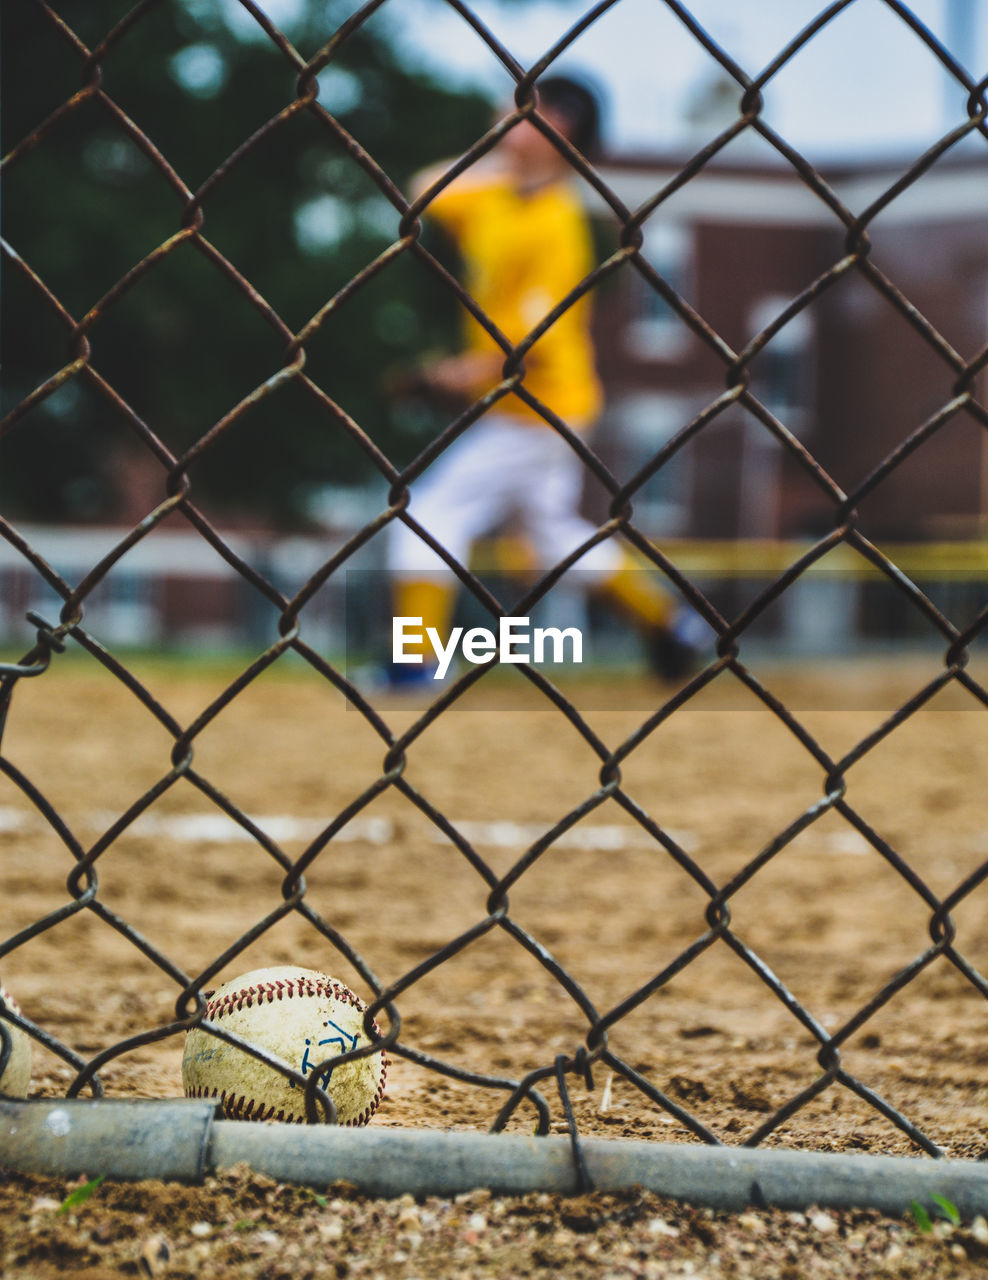 Close-up of baseball seen through chainlink fence